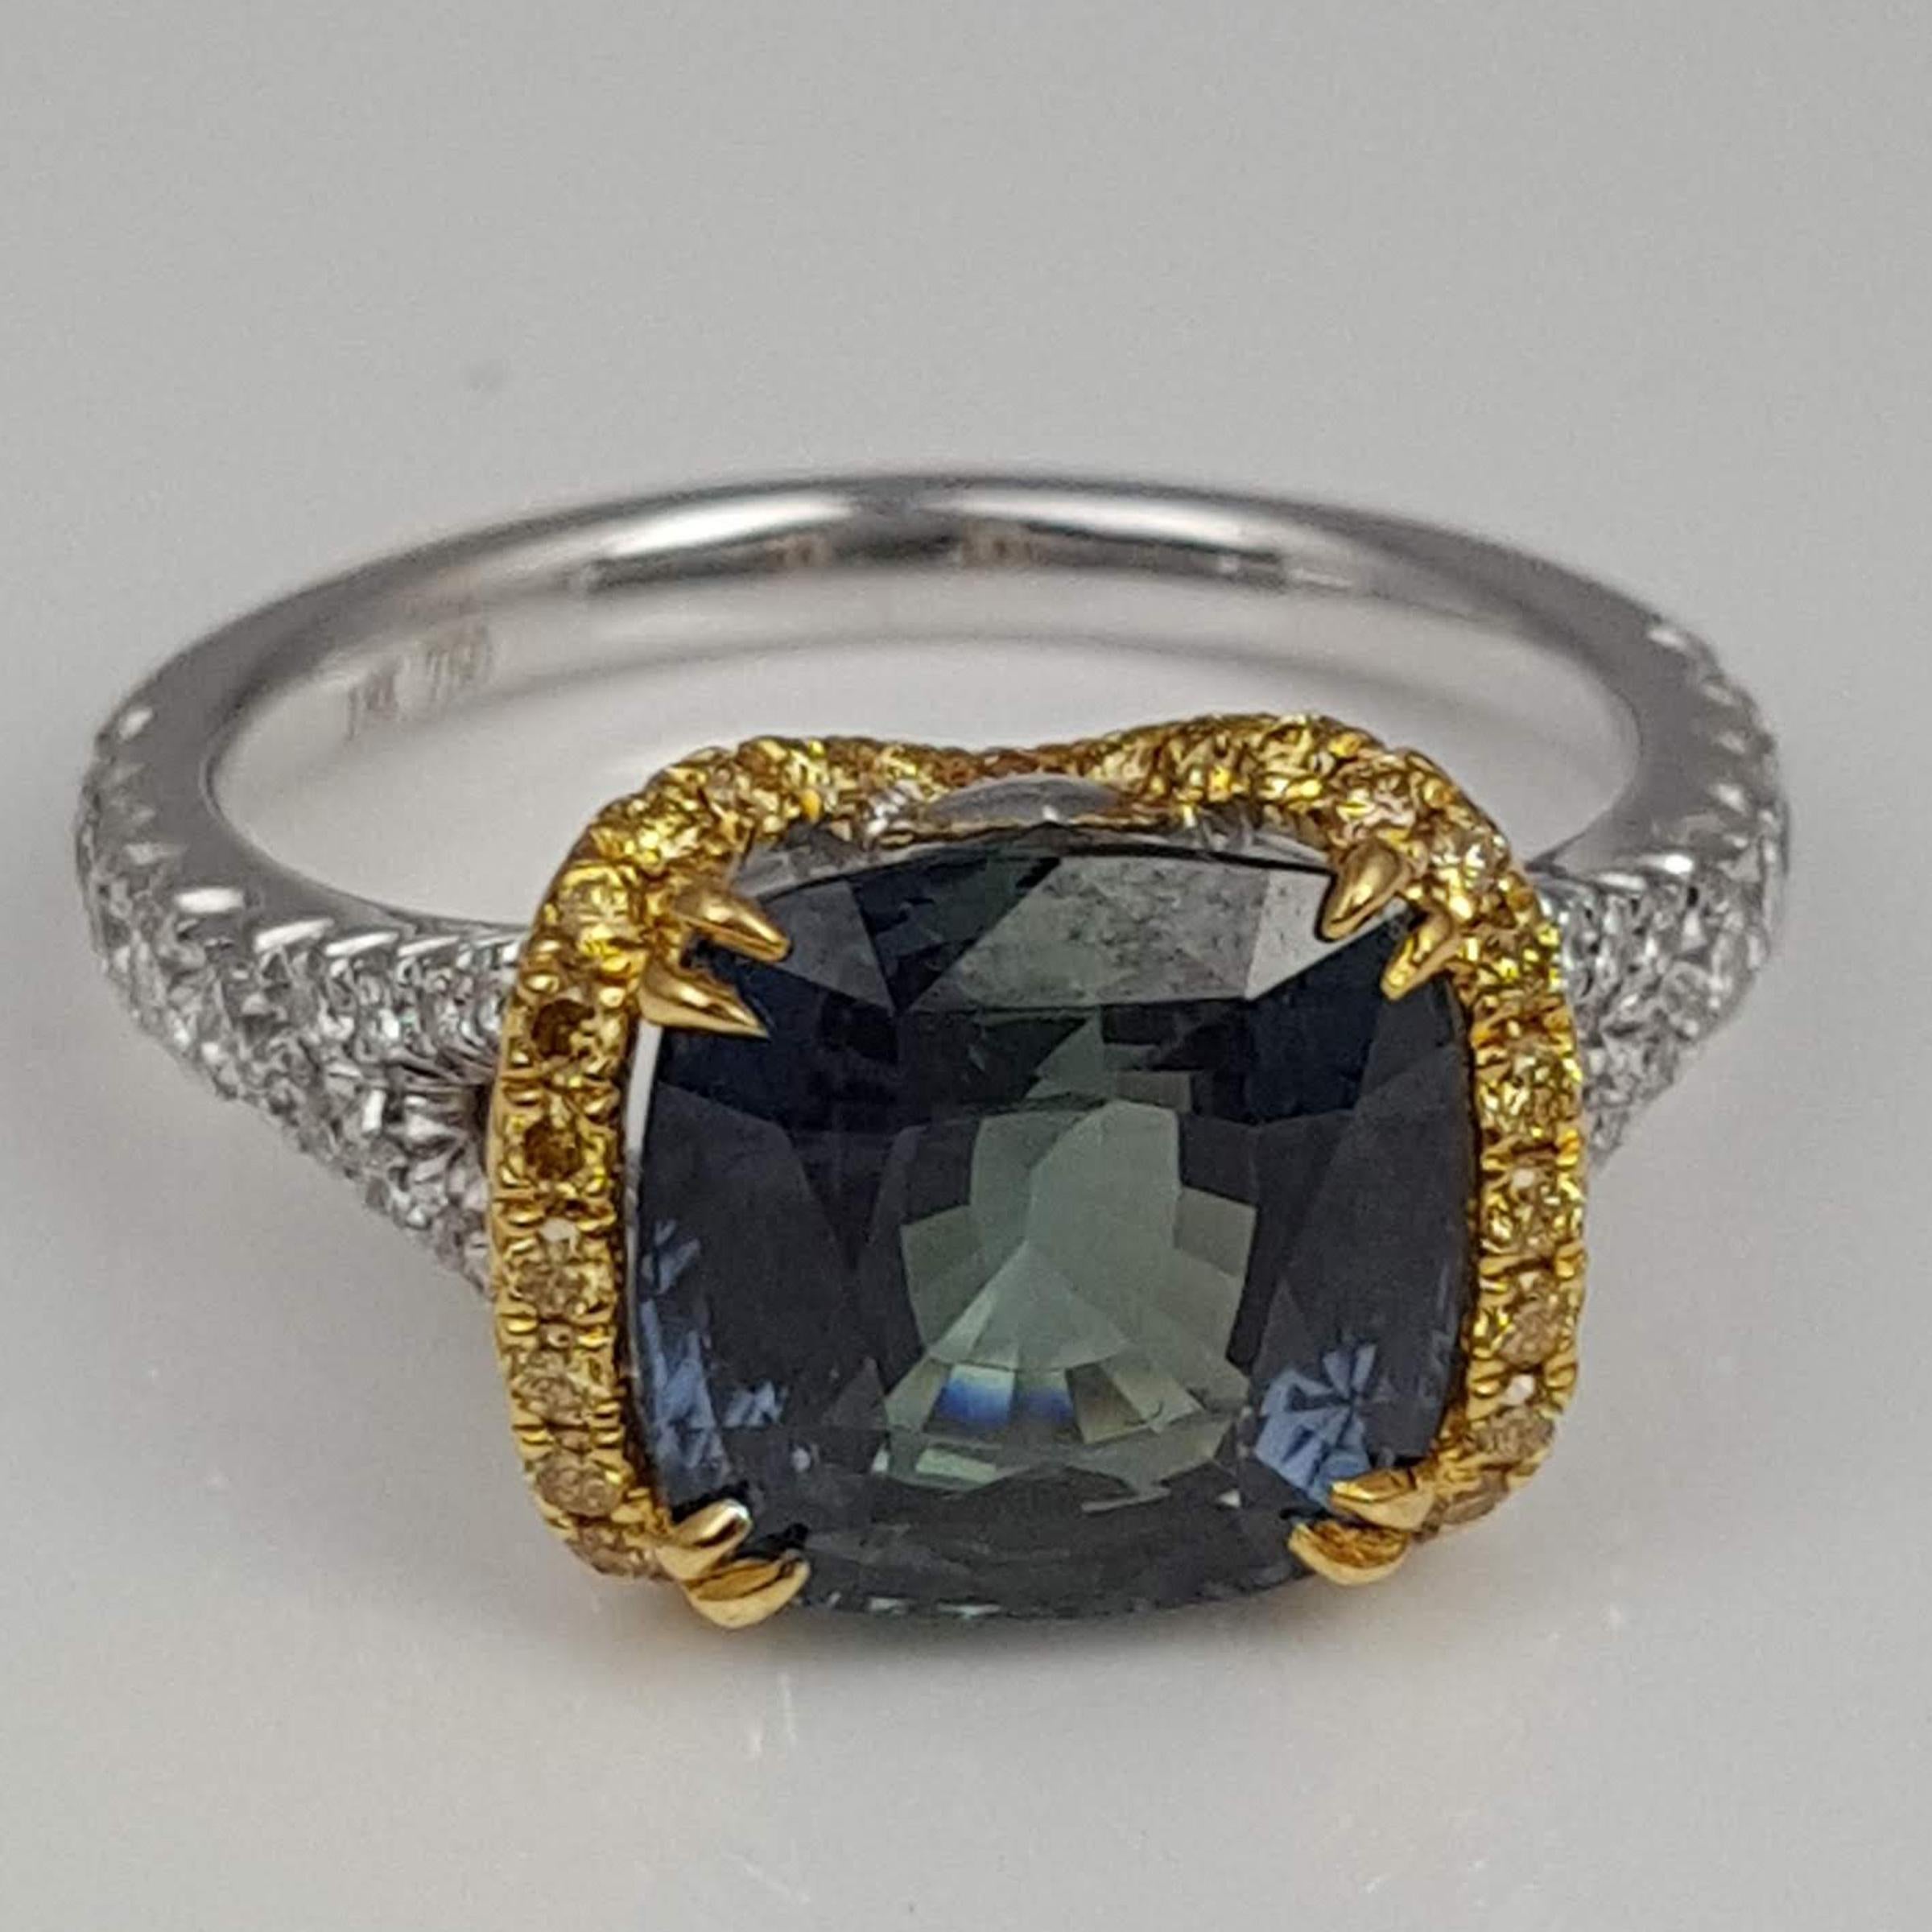 This ring is a stunning piece that combines elegance with uniqueness. The 4.50 carat cushion-cut Green Sapphire at the center is not only impressive in size but also comes with a GIA certification, ensuring its quality and authenticity. The green